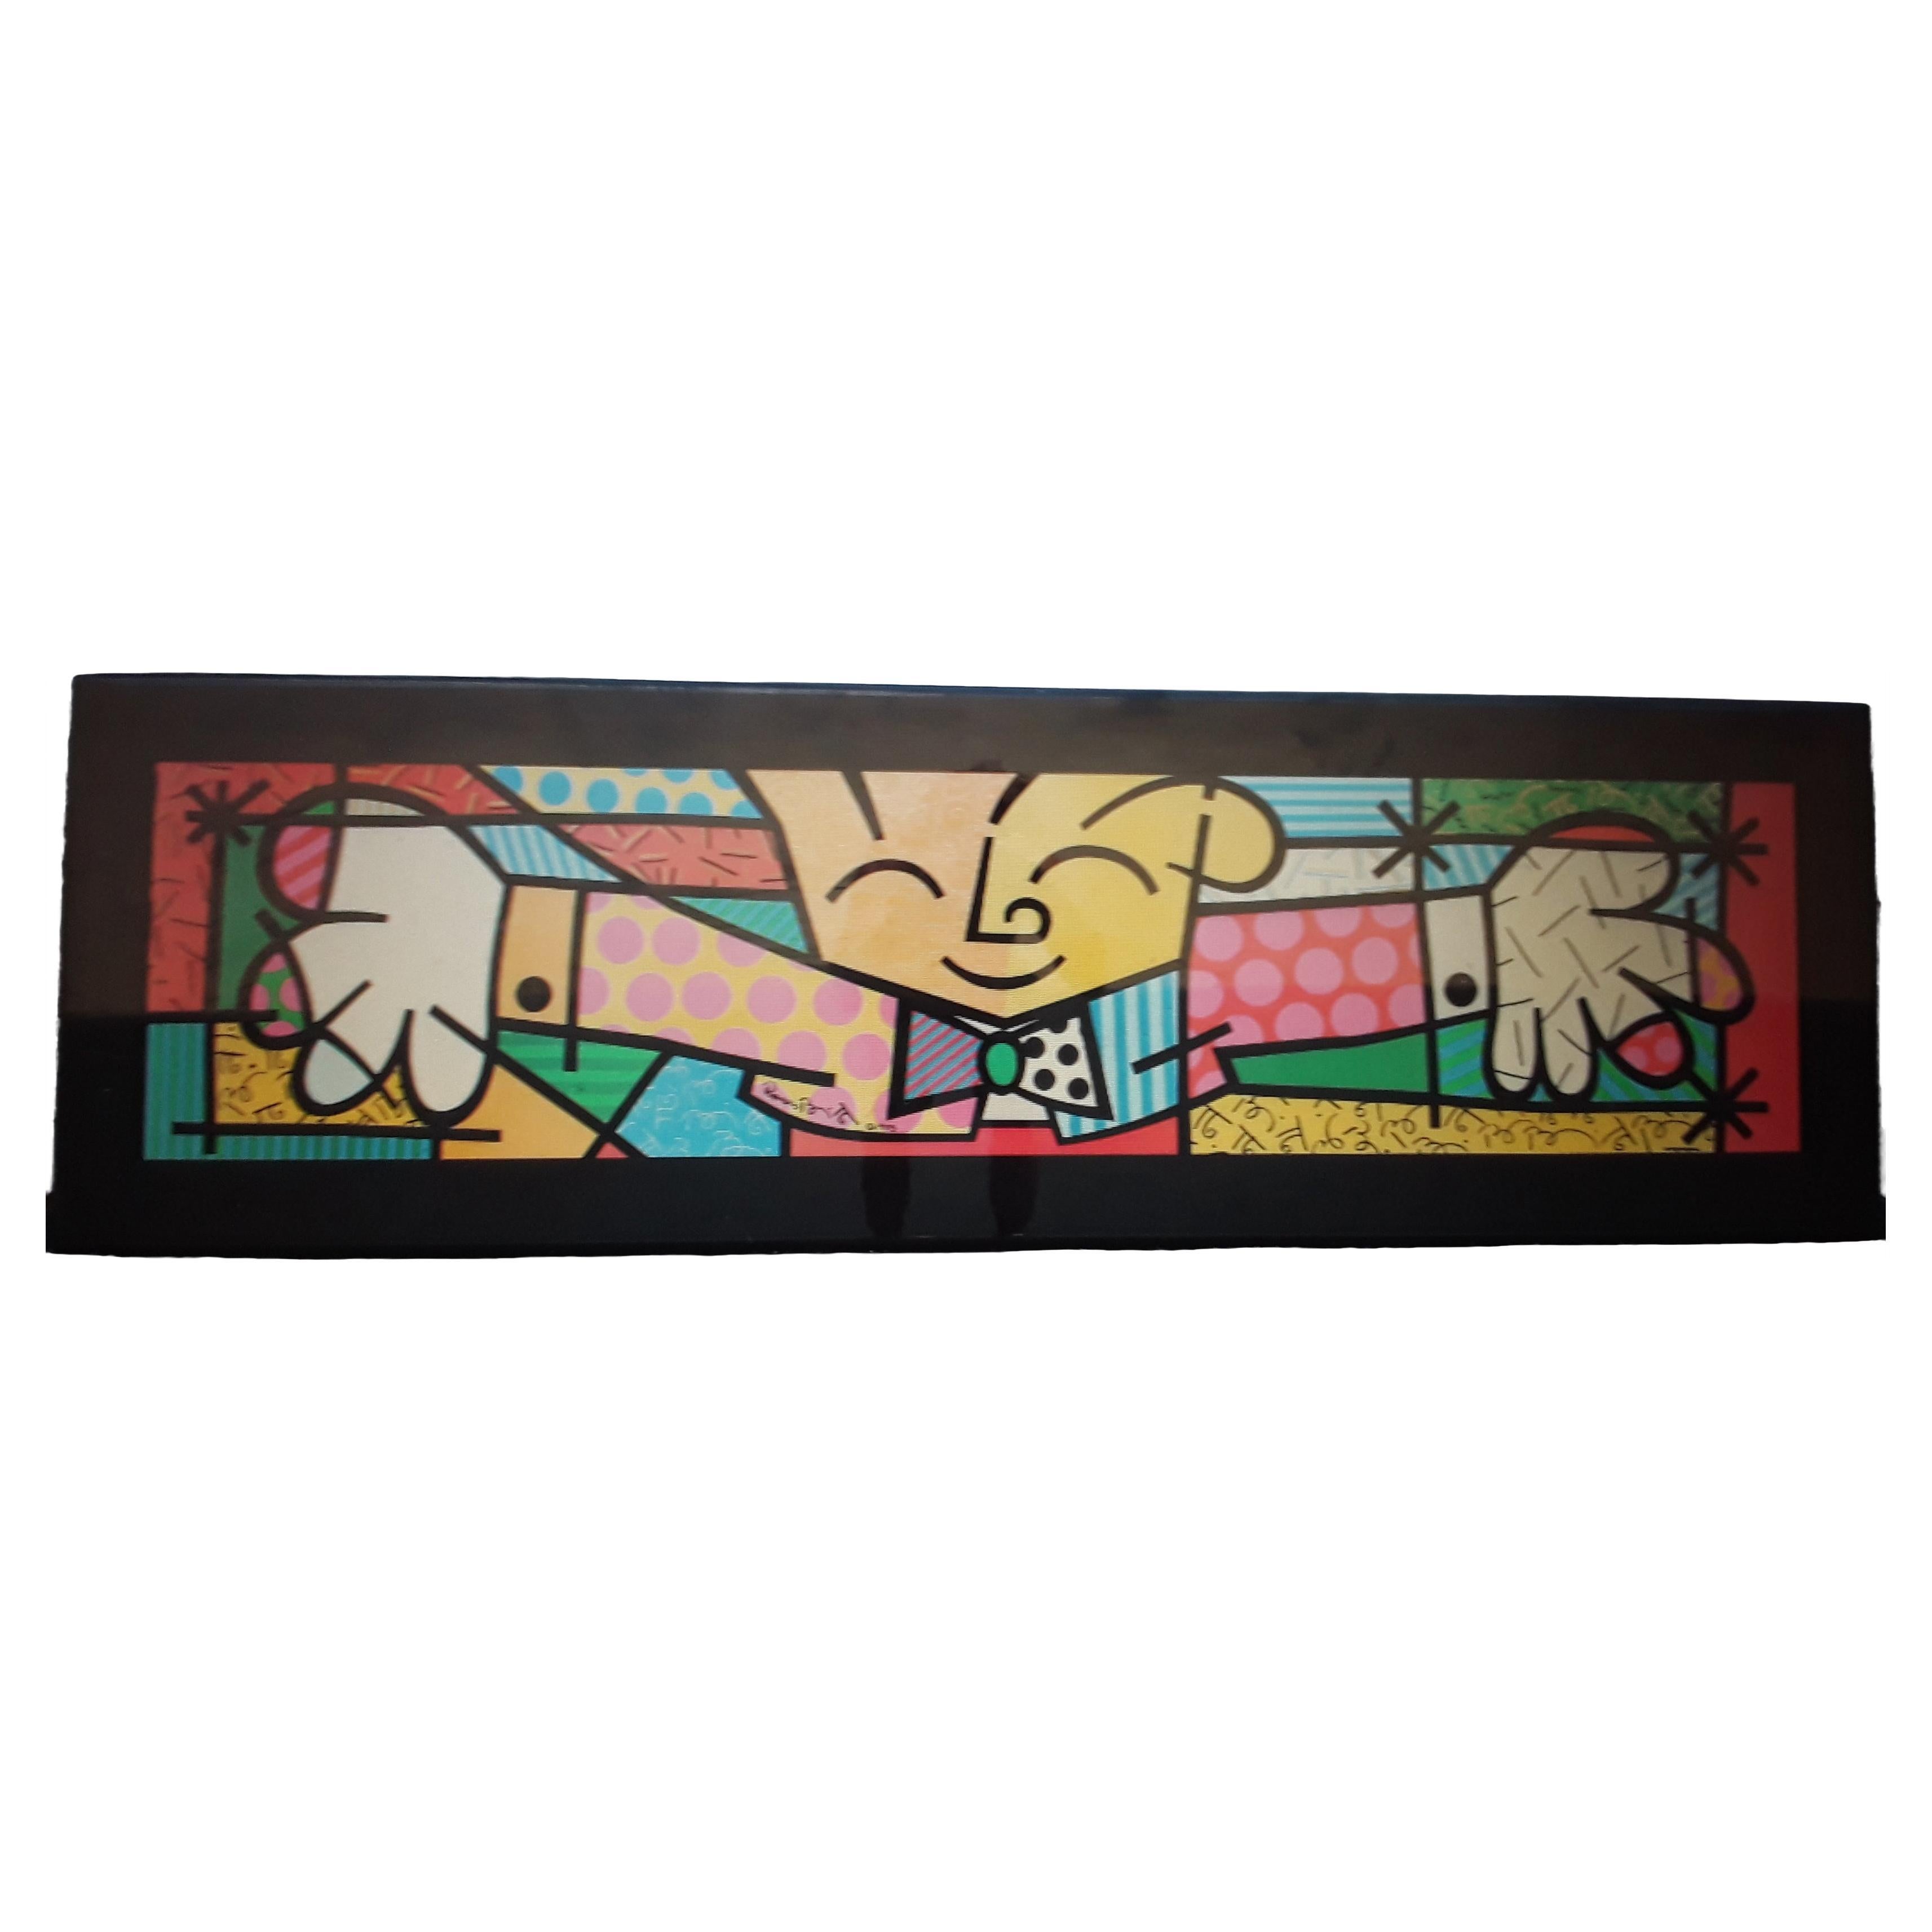 c1993  Vintage Romero Britto Print "Deco Gentleman With His Bowtie" Framed For Sale